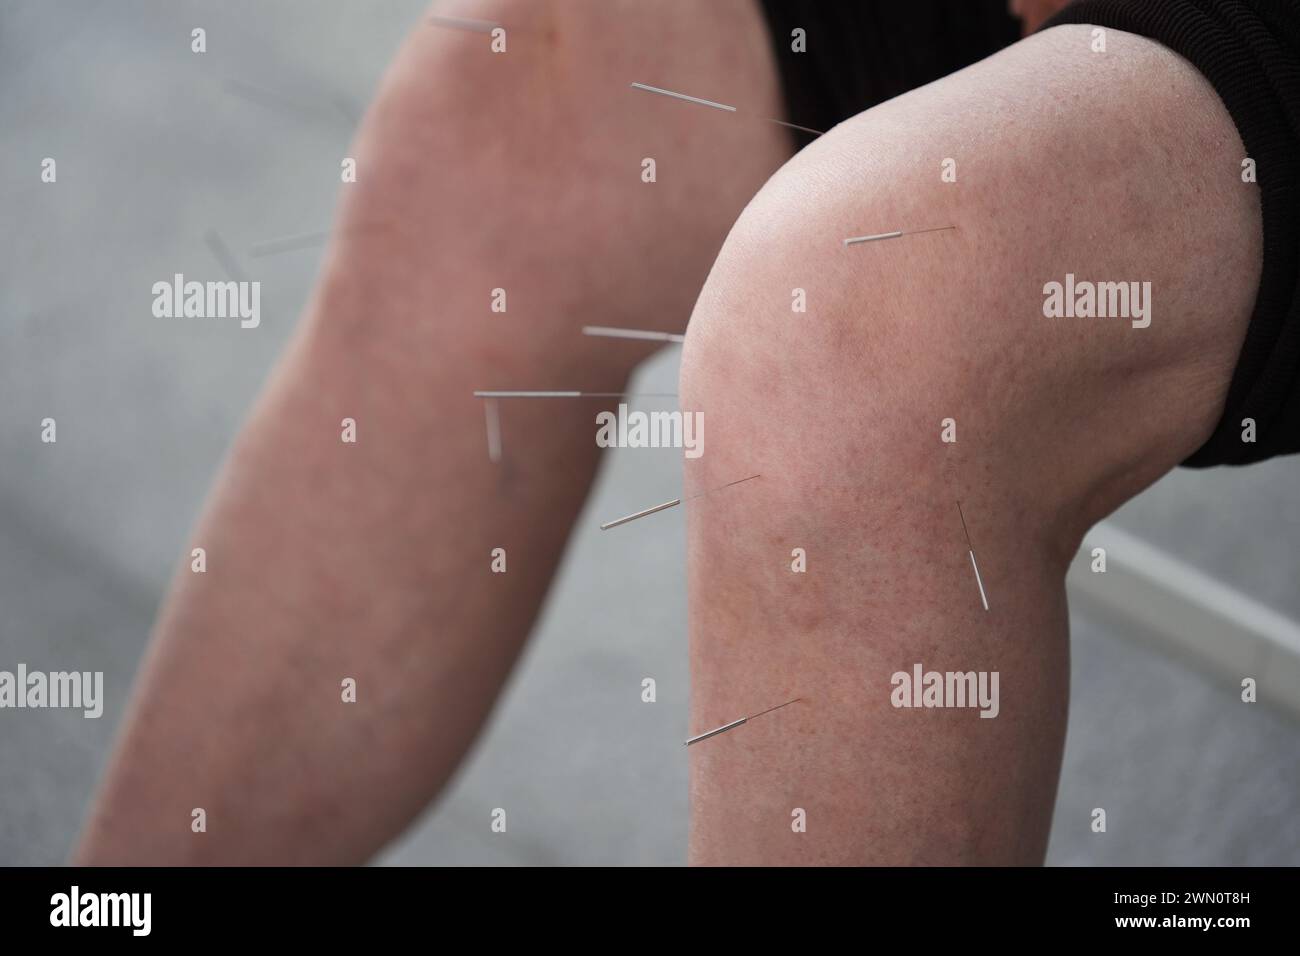 Close-up of a person receiving acupuncture treatment in a medical practice Stock Photo